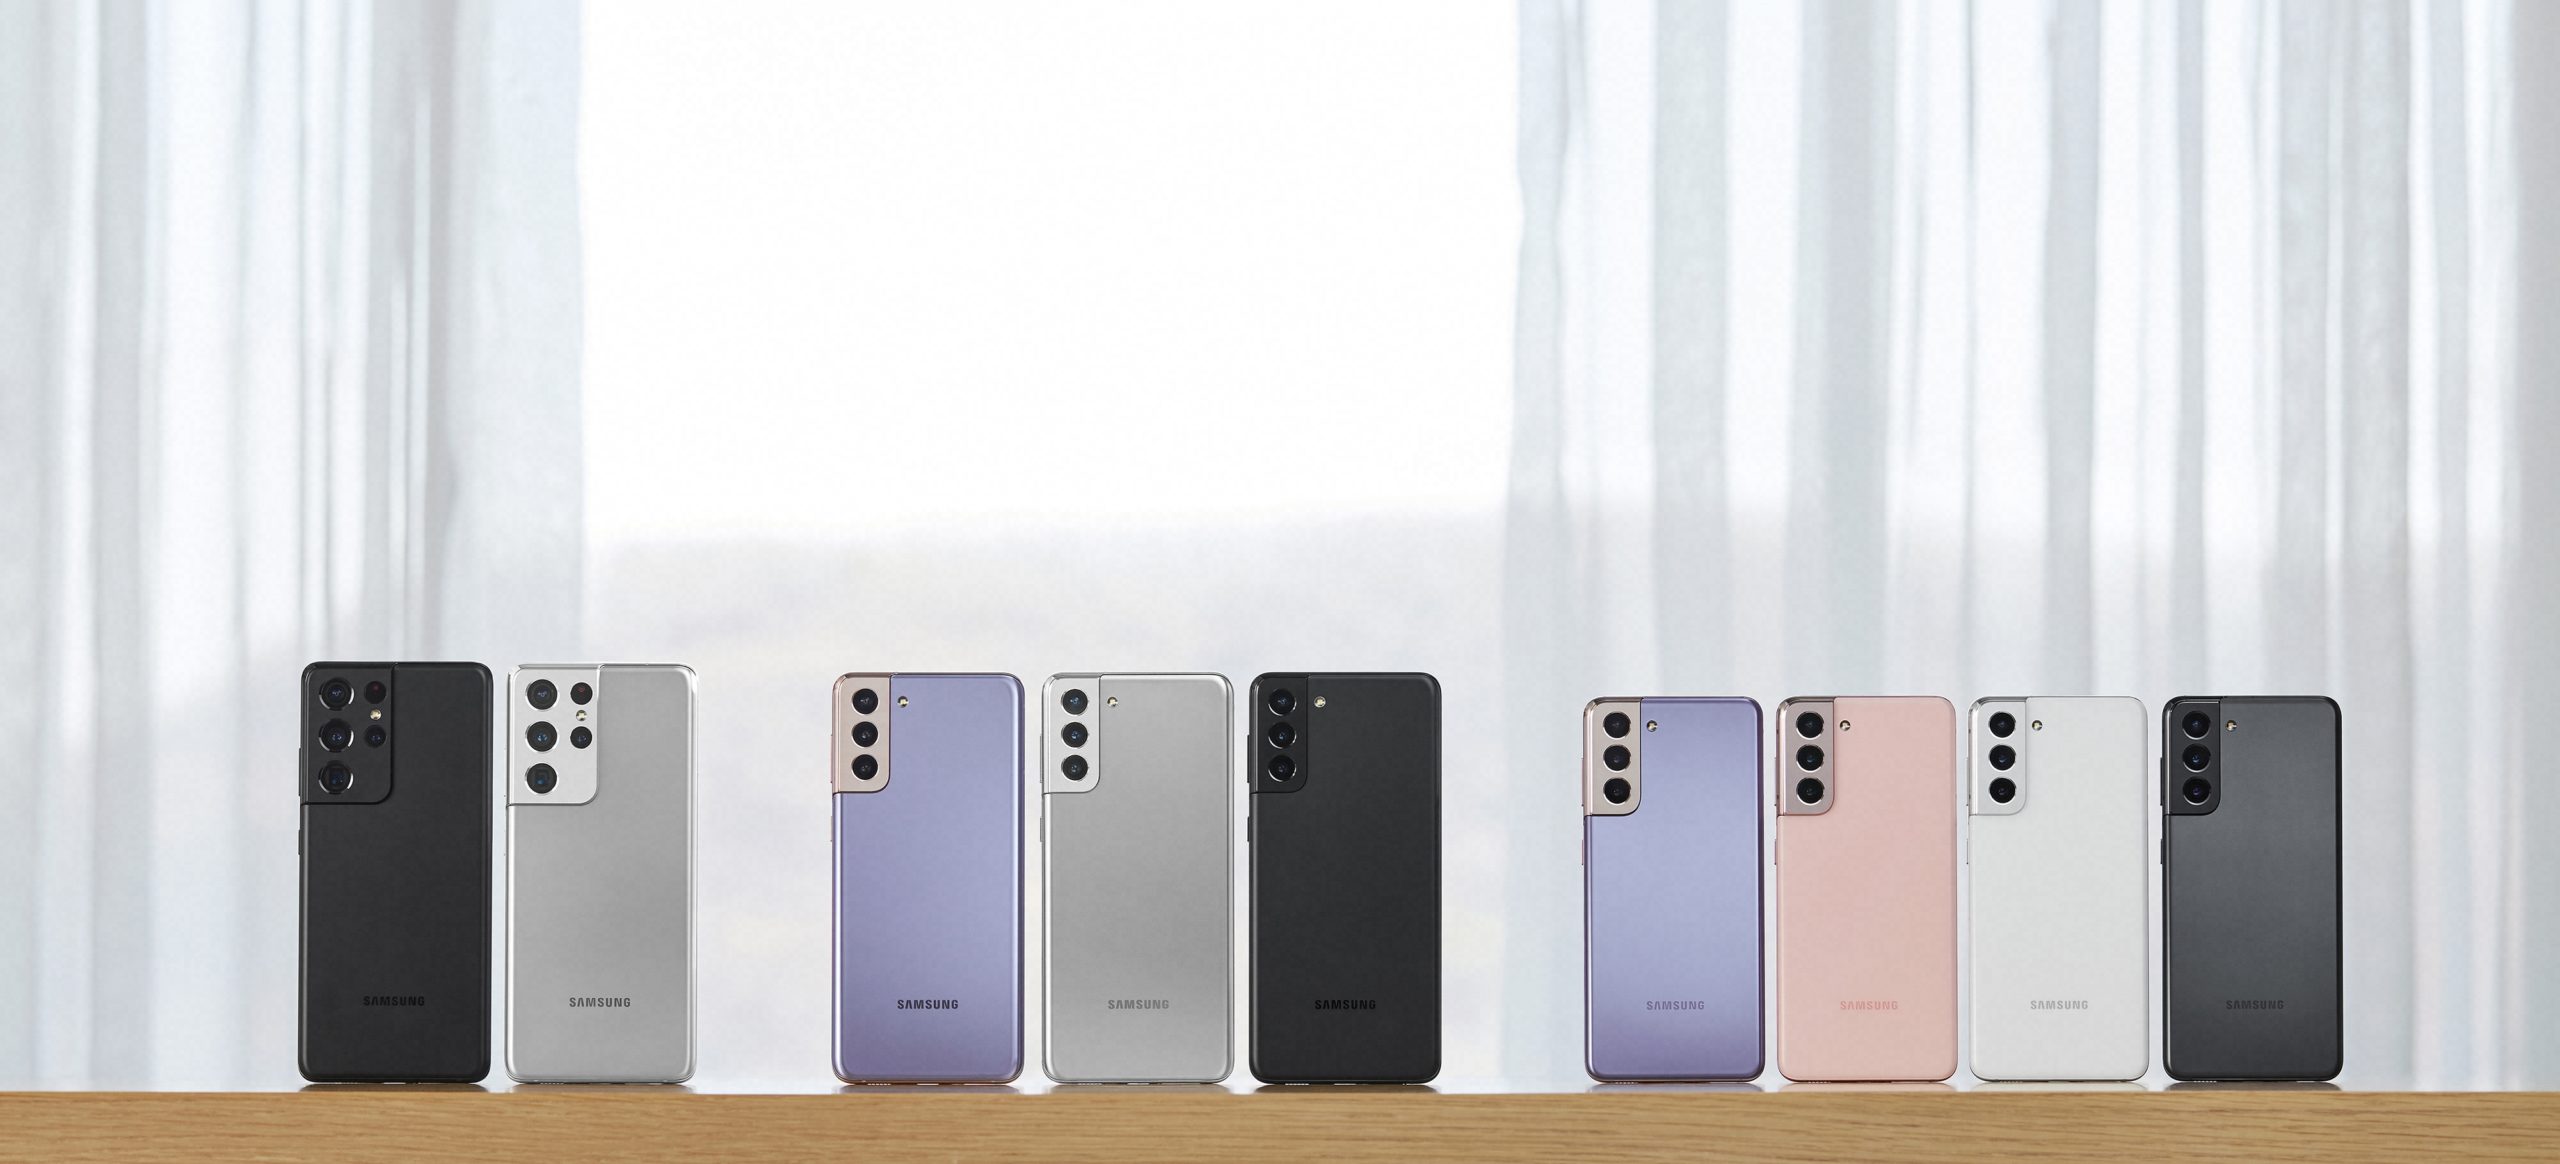 Here's the full S21 family from left to right: the S21 Ultra in black and silver, the S21+ in purple, silver, and black, and the standard S21 in purple, pink, silver, and black.  (Image: Samsung)